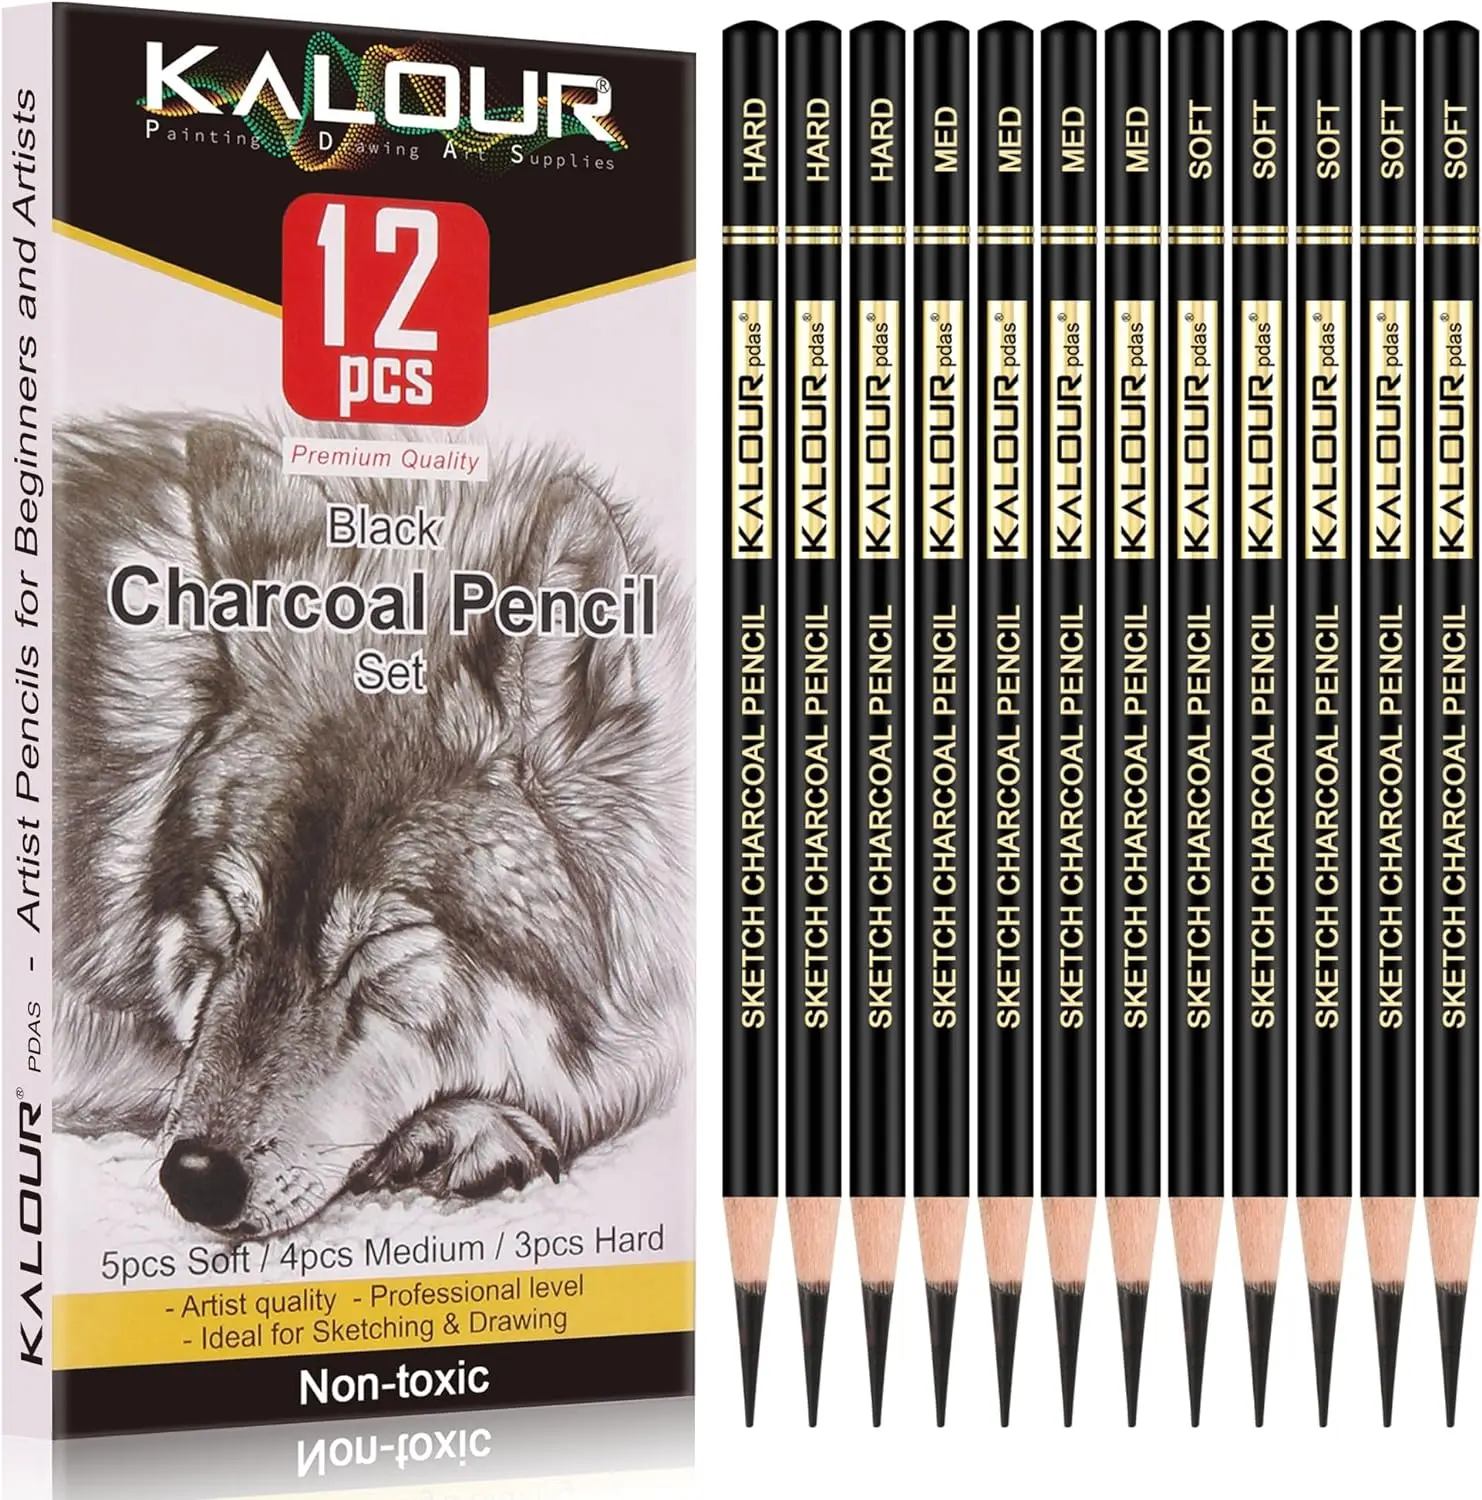 Professional Charcoal Pencils Drawing Set -12 Pieces Soft, Medium and Hard Charcoal Pencils for Drawing, Sketching, Shading, Art 12 pcs box sketch charcoal pencil set soft medium hard professional drawing stationery professional art supplies 112 12